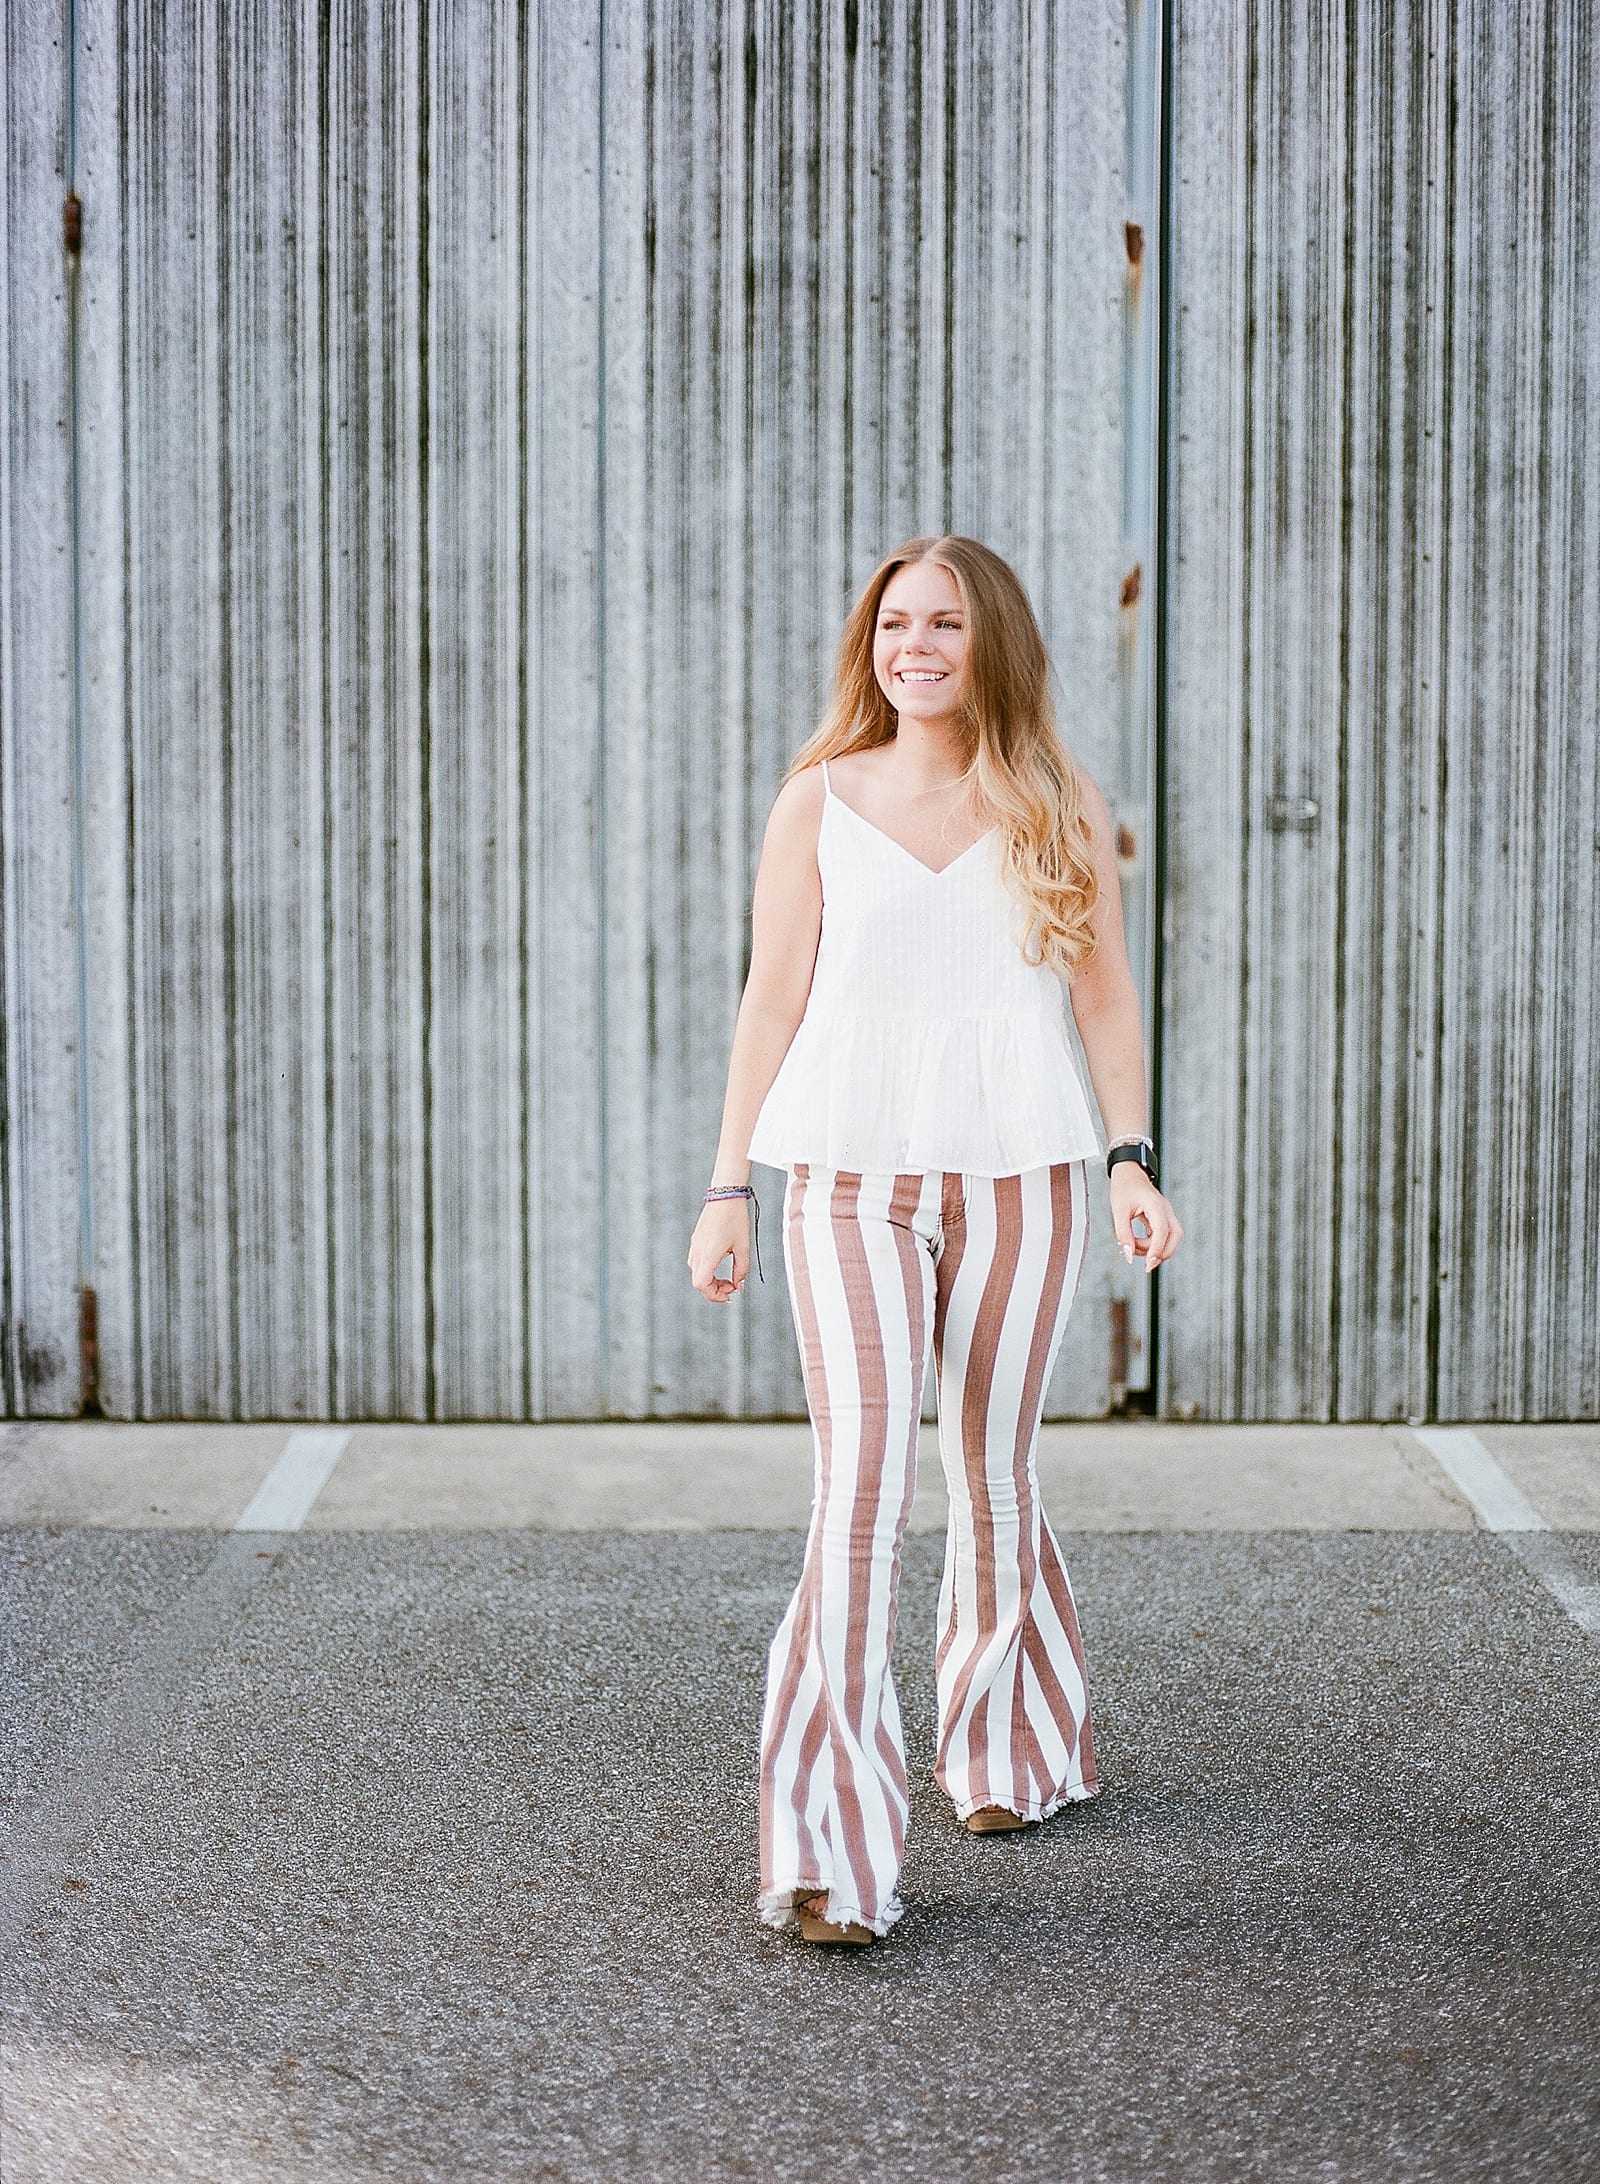 Asheville Senior Photos Girl in front of airplane hanger with striped pants Photo